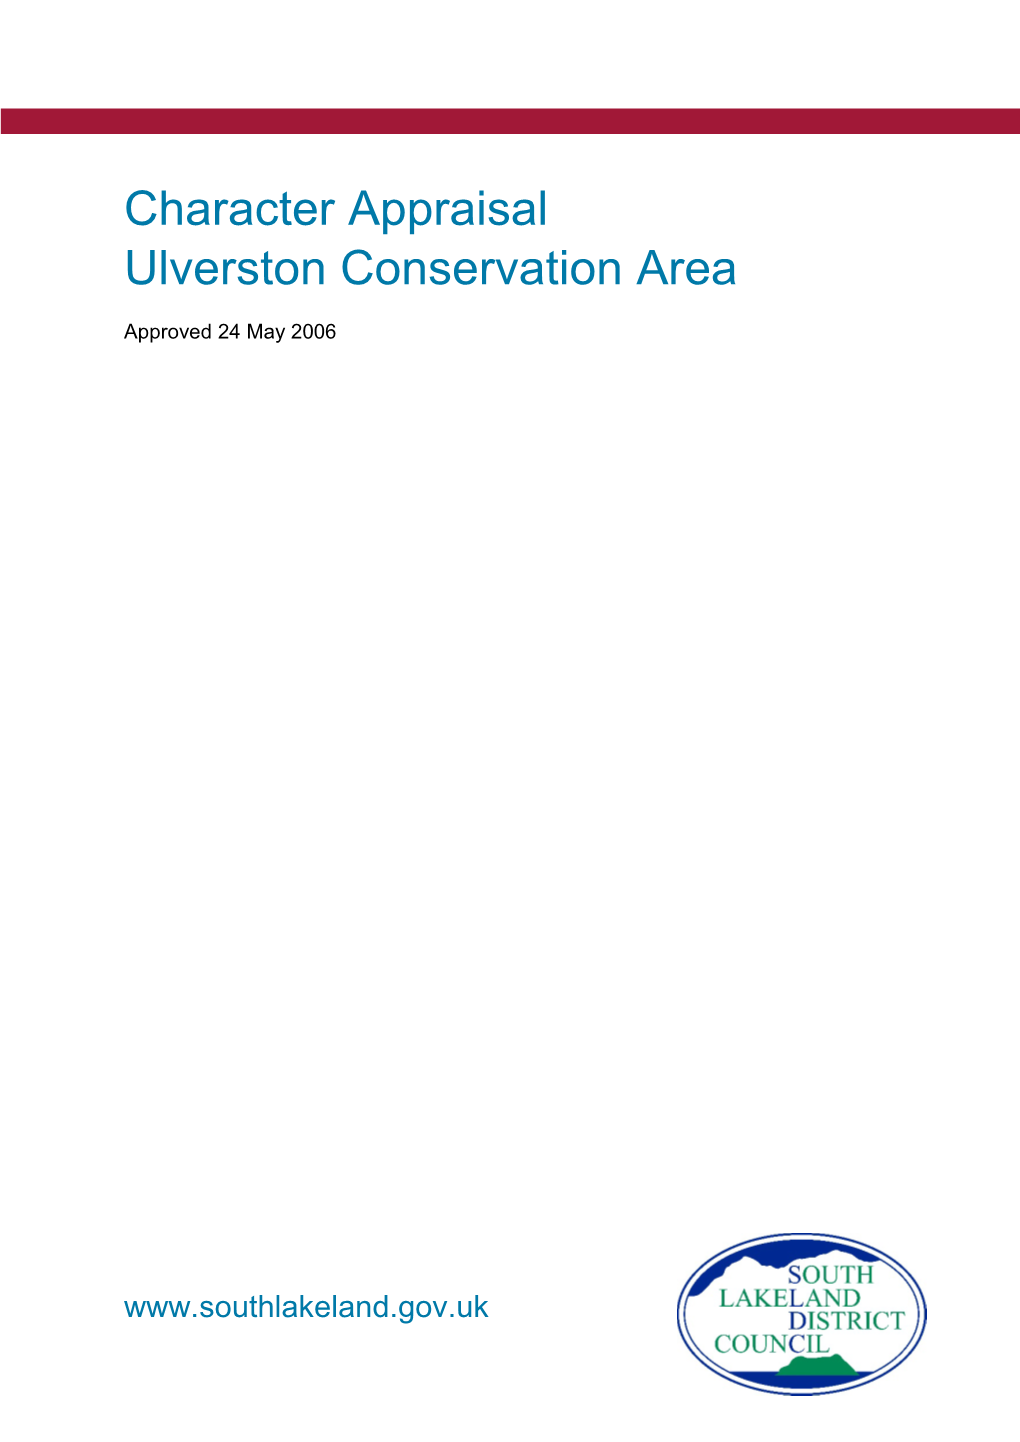 Character Appraisal: Ulverston Conservation Area